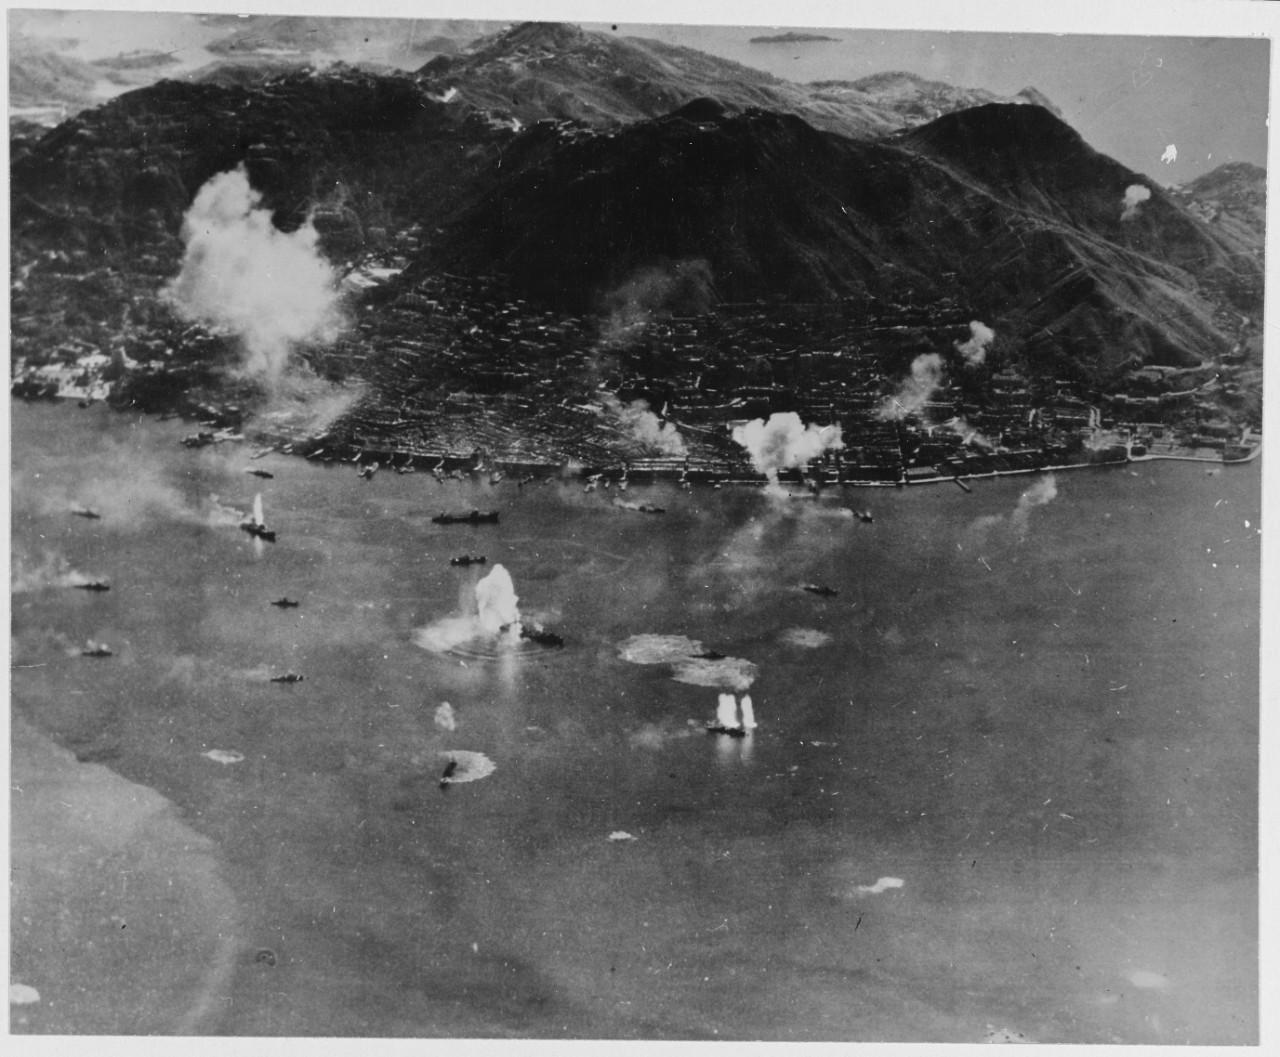 Hong Kong harbor under attack by planes from Vice Admiral John S. McCain's Fast Carrier Task Force. 16 January 1945